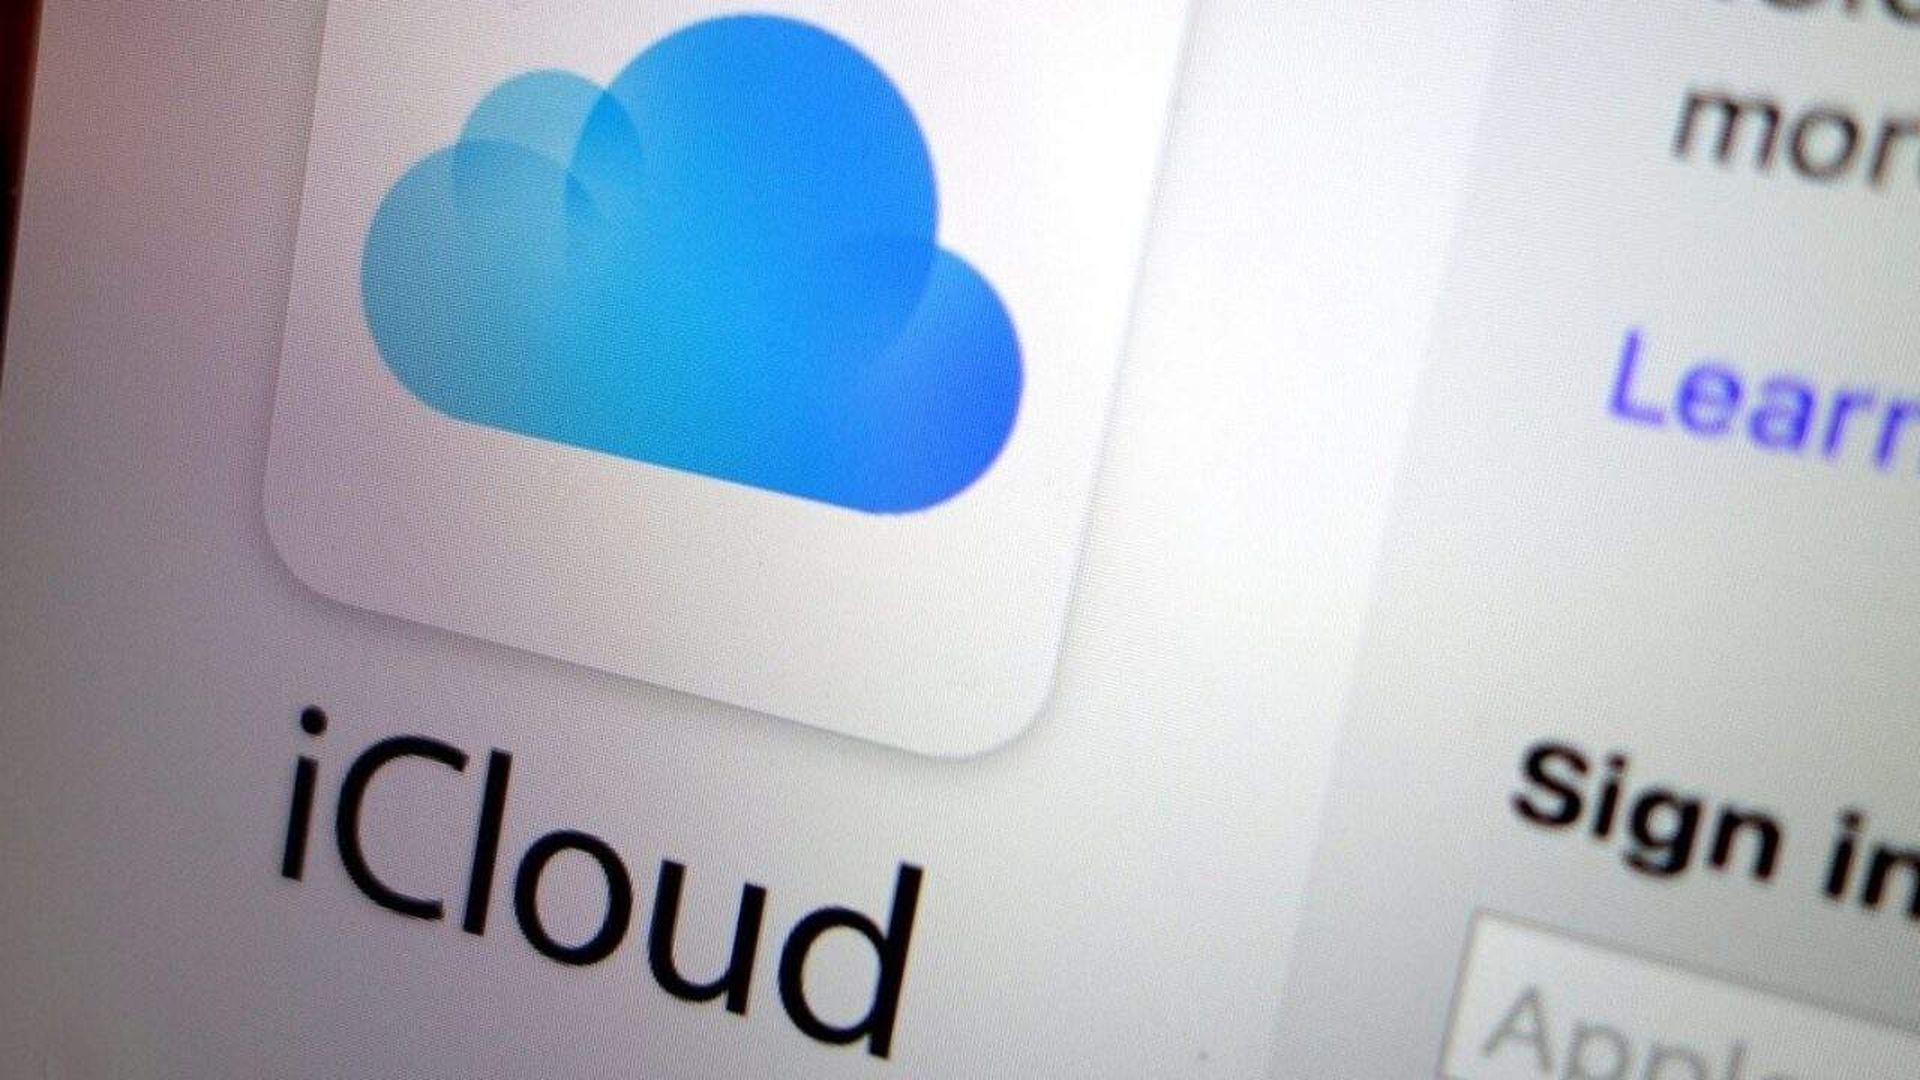 iCloud could not communicate with the server